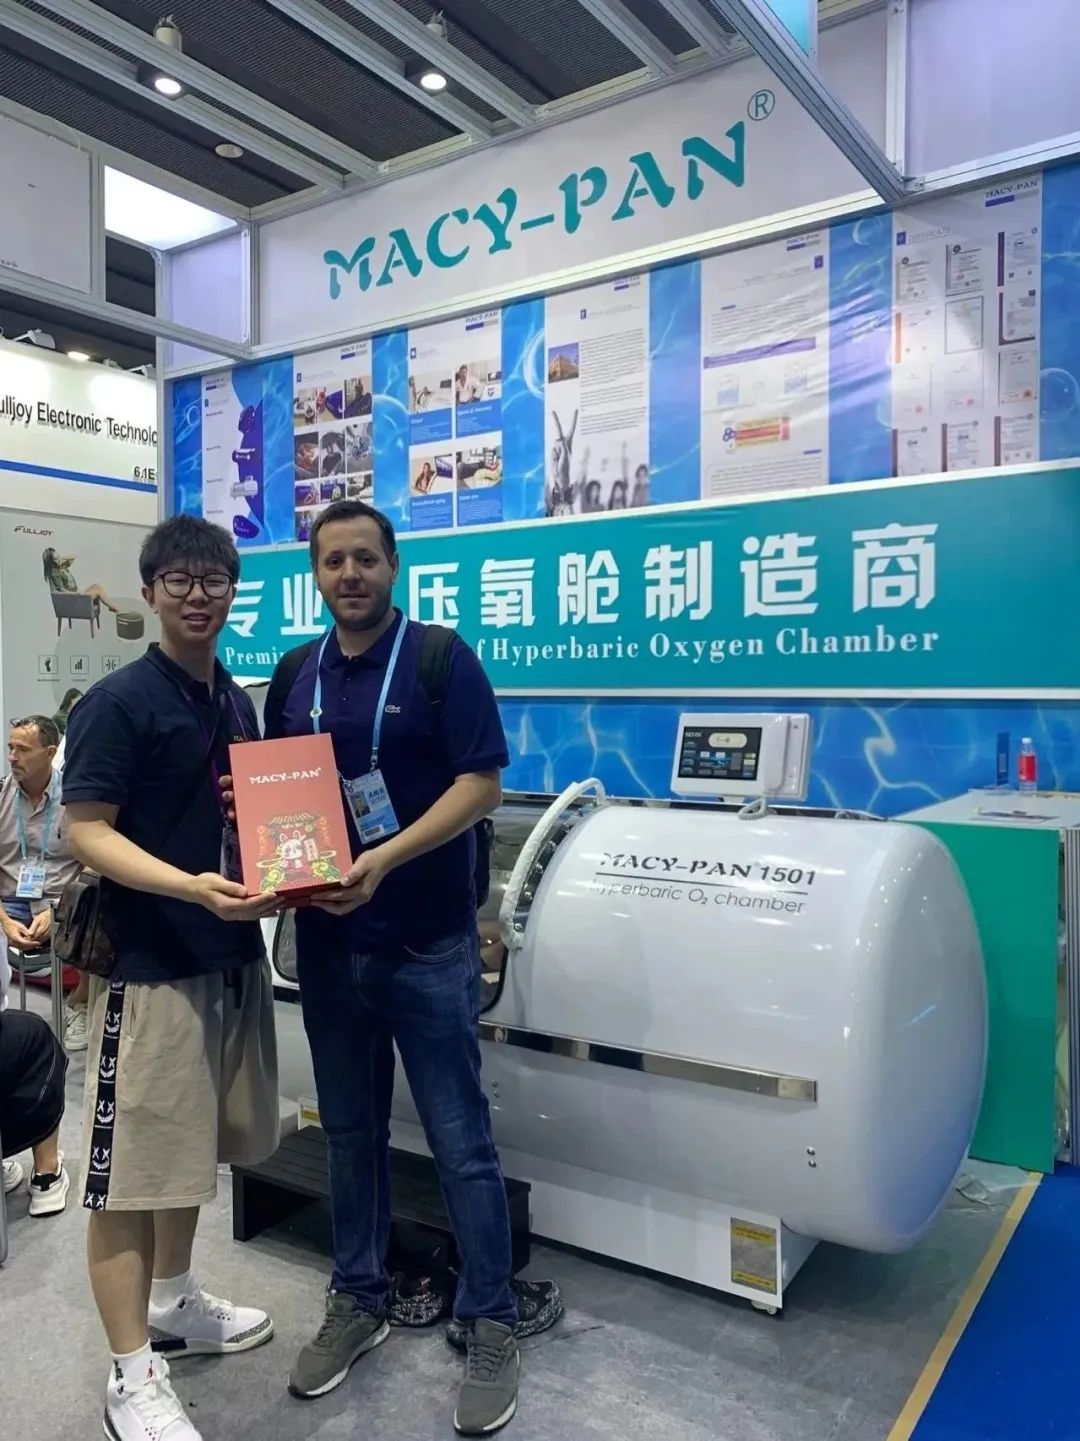 Products Exported to Over 120 Countries and Regions! MACY-PAN Showcases the Strong Manufacturing Capability of 'Songjiang Intelligence"